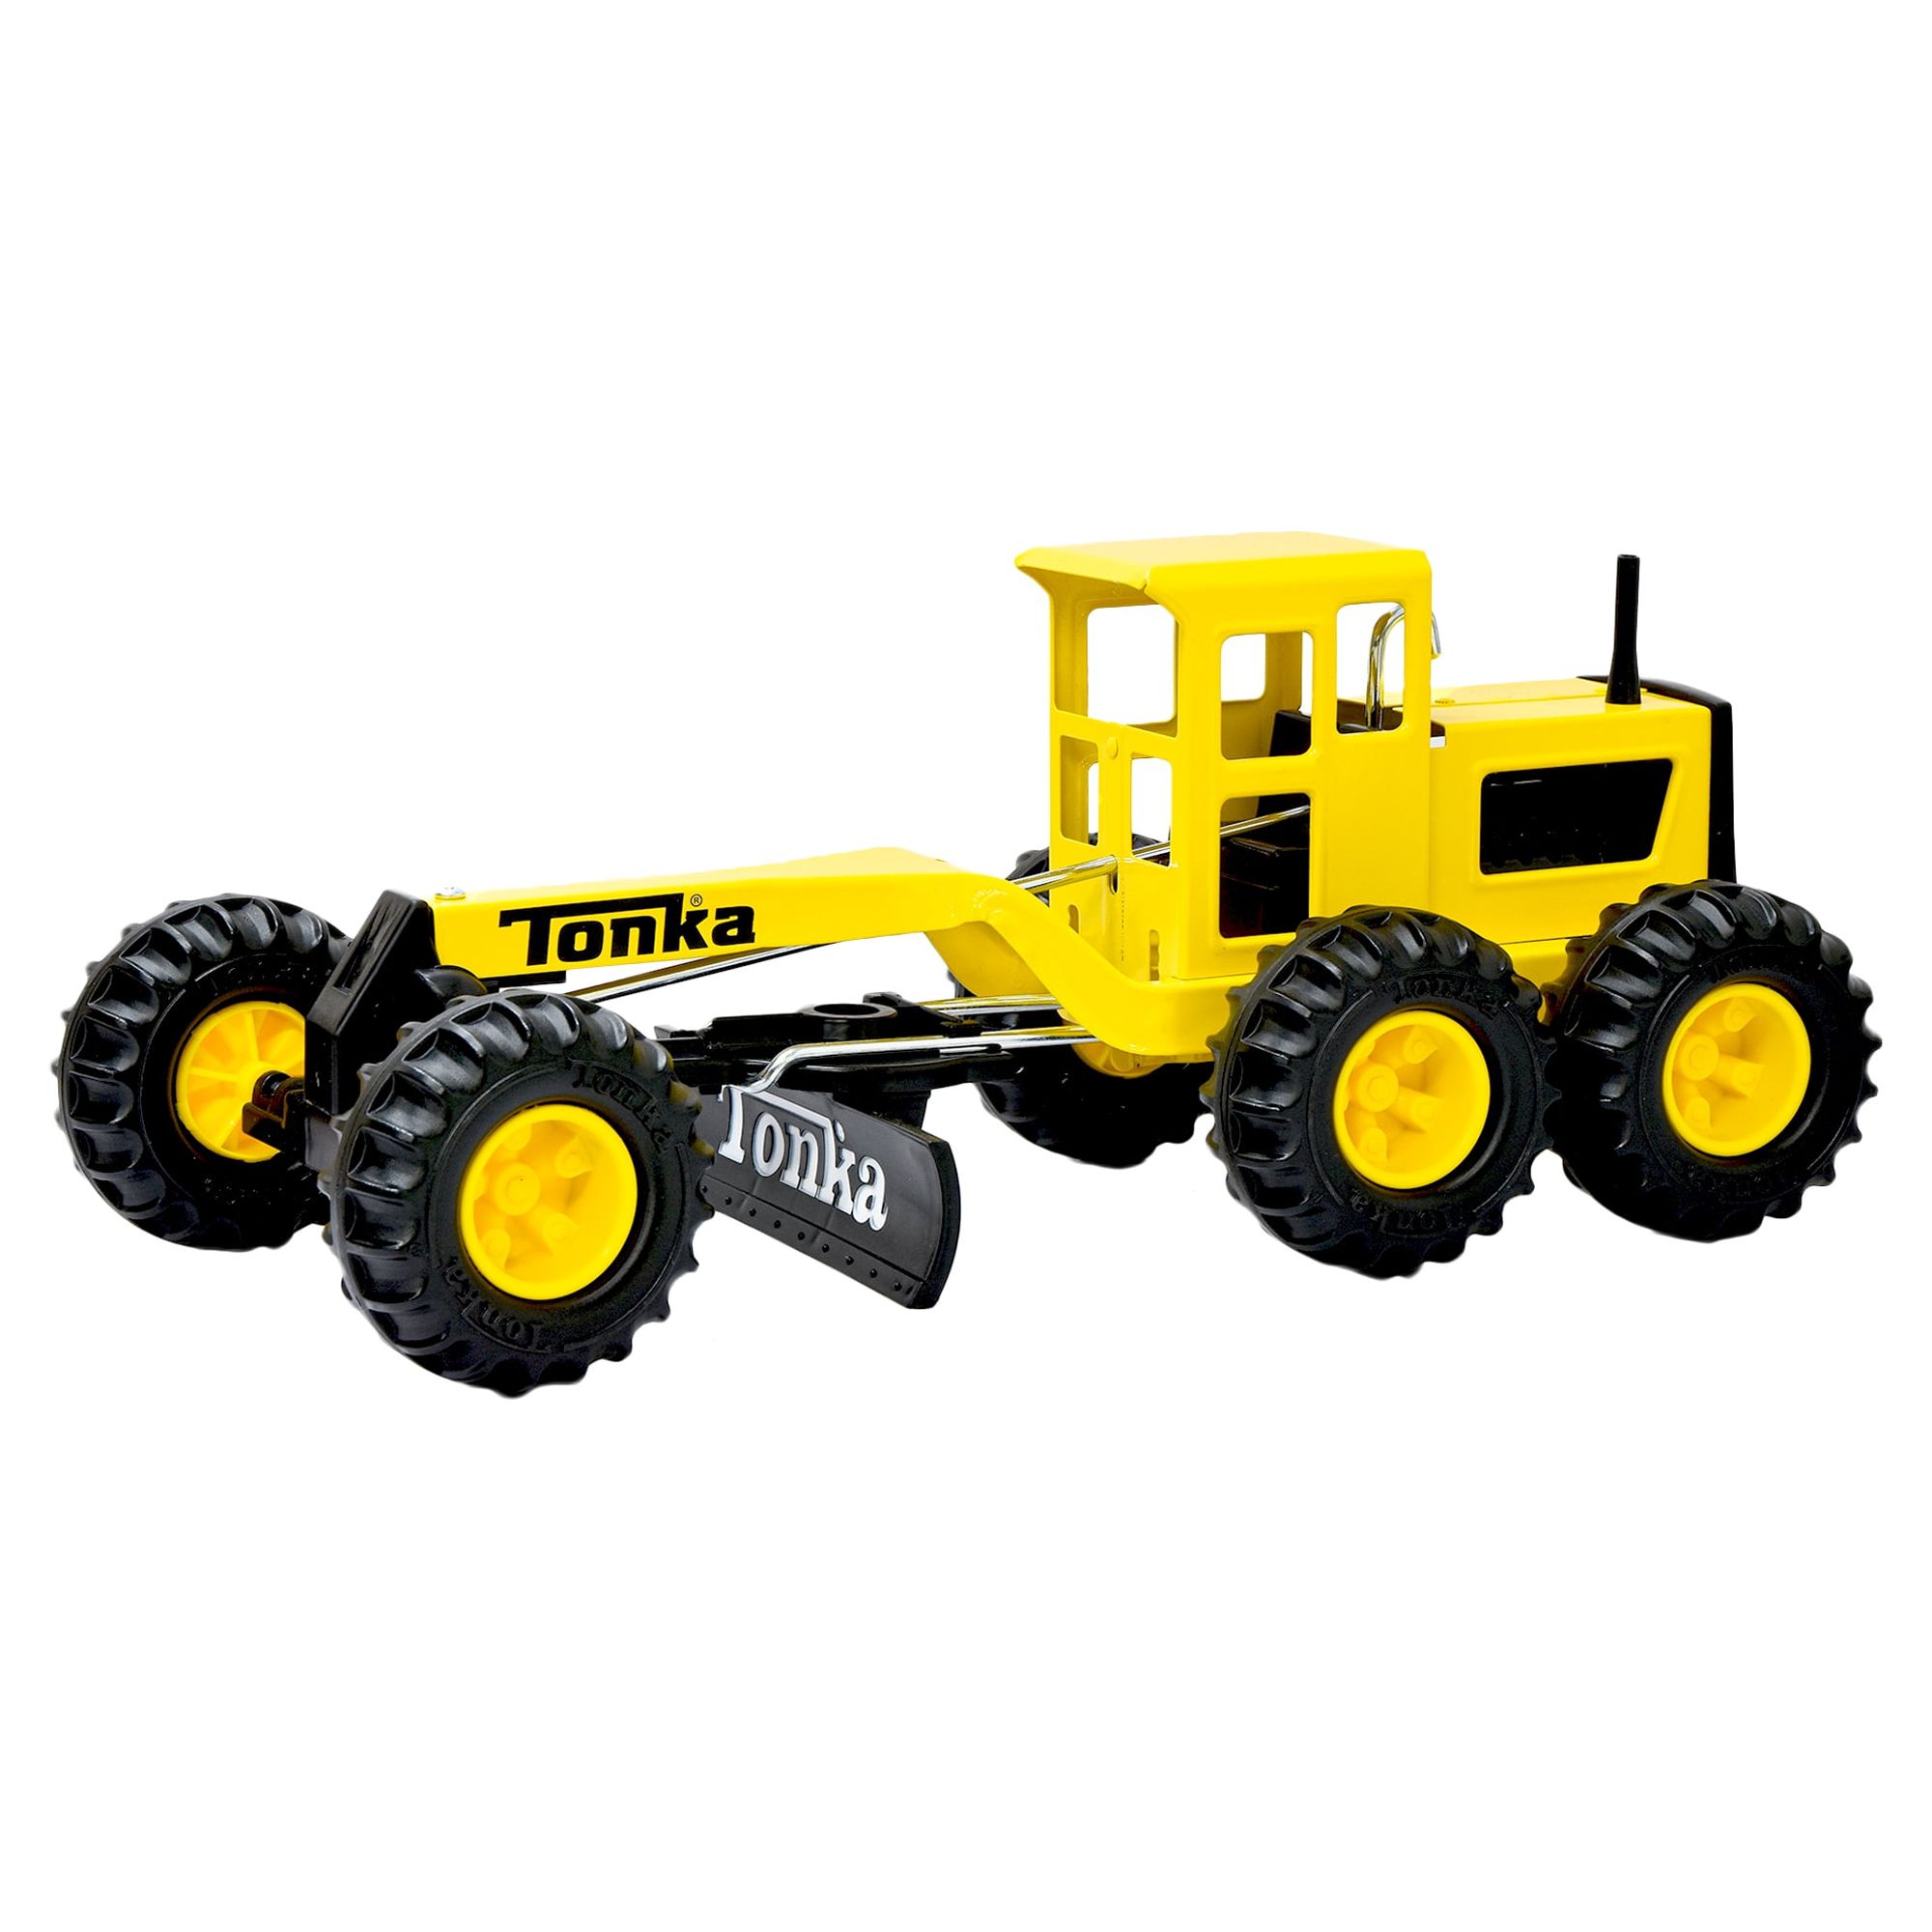 Tonka Steel Classics Road Grader, 17" Long, Moveable Blade & Lever Axle Steering, Toy Vehicle, Toy Truck, Realistic & Creative Construction Play, Great Gift, Kids Ages 3+ - image 3 of 6